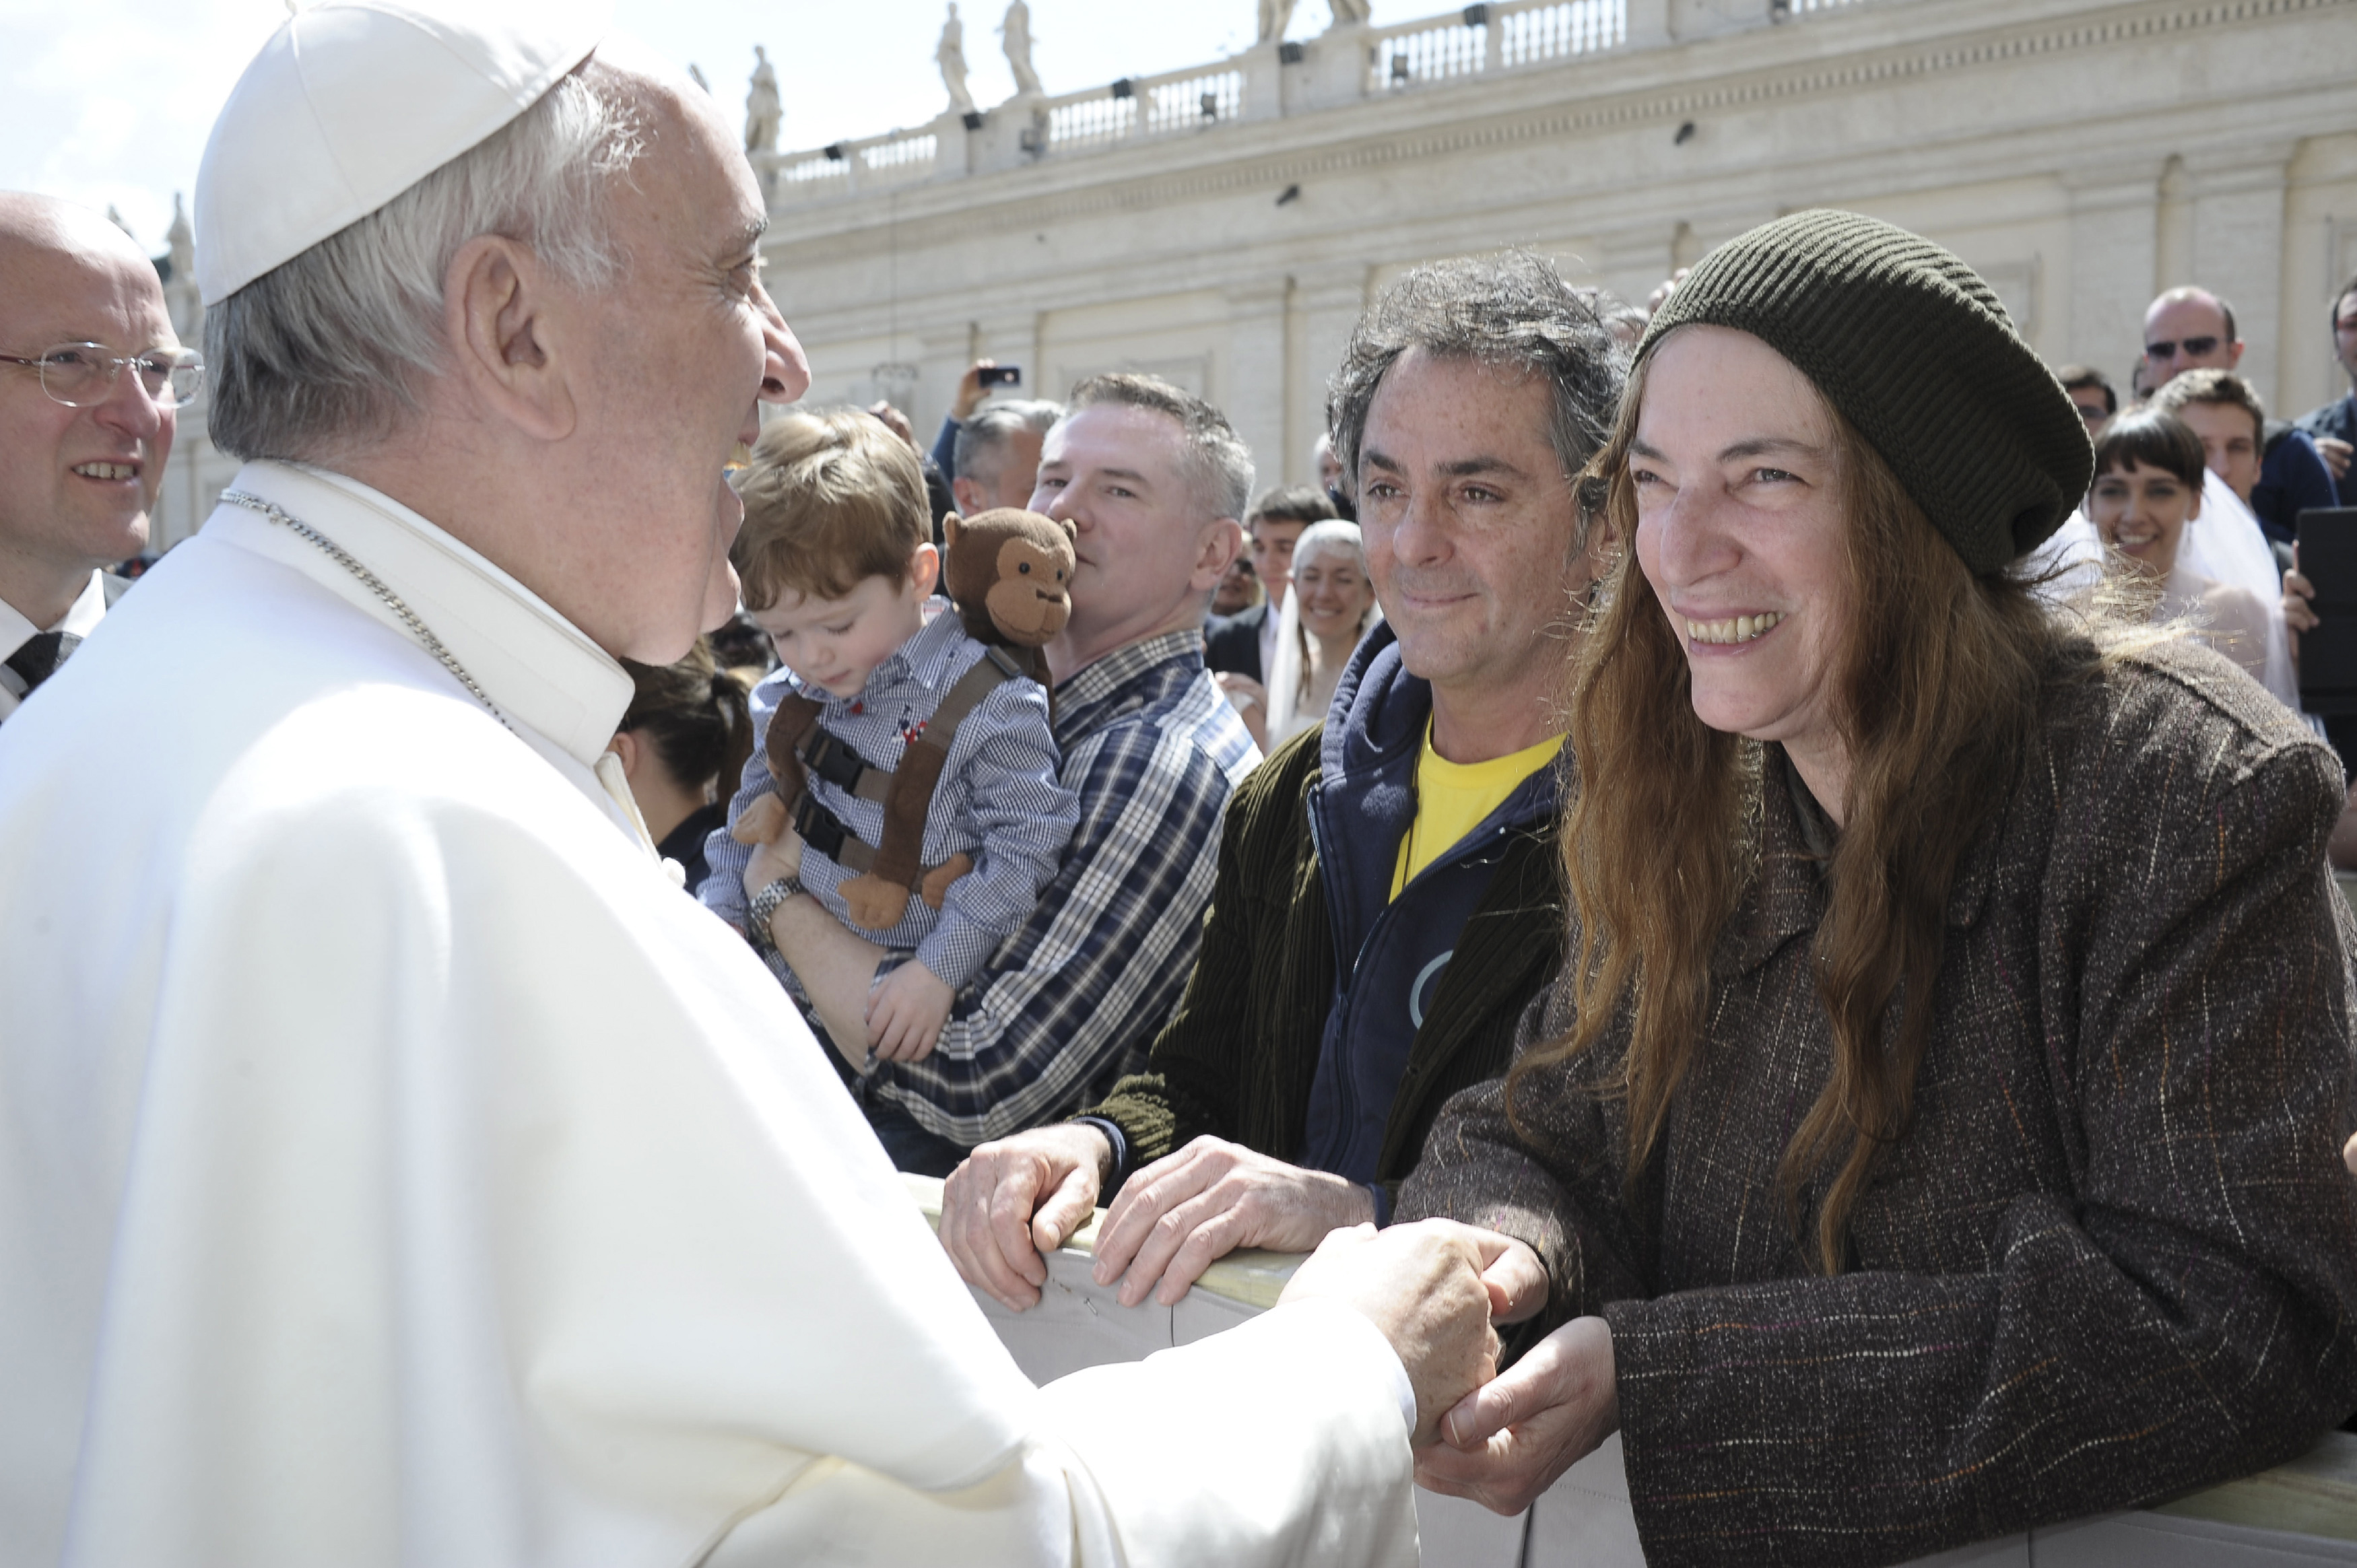 Pope Francis greets Patti Smith at the Vatican on April 10, 2013.